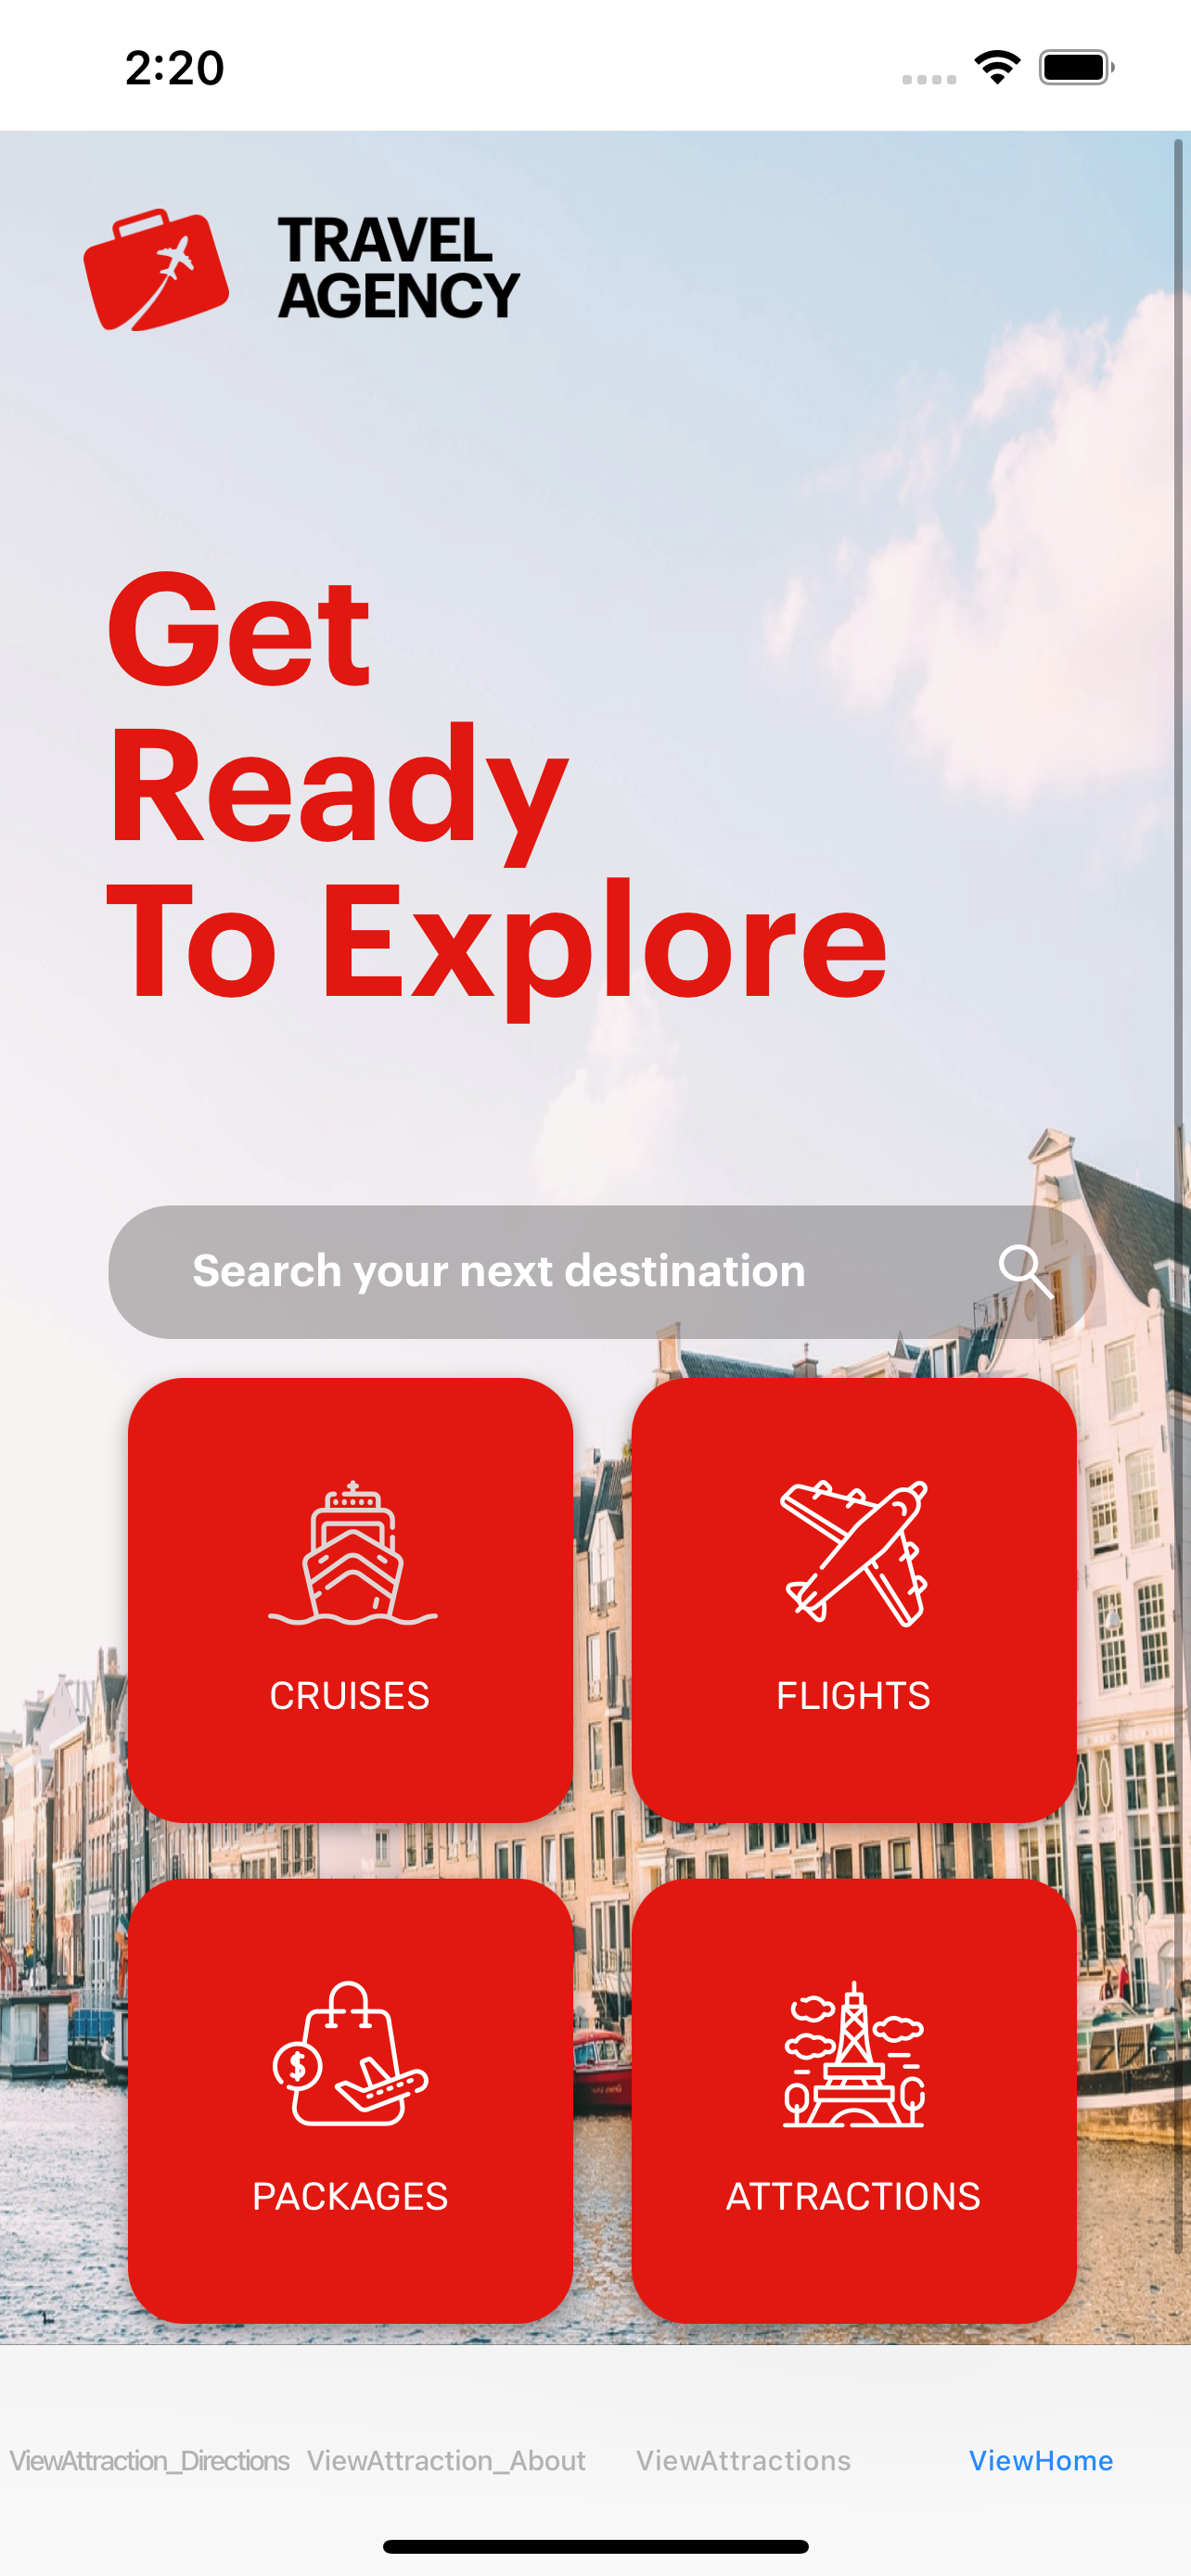 TravelAgency-MobileFrontnend-iOS-Home_20211025123058_1_png